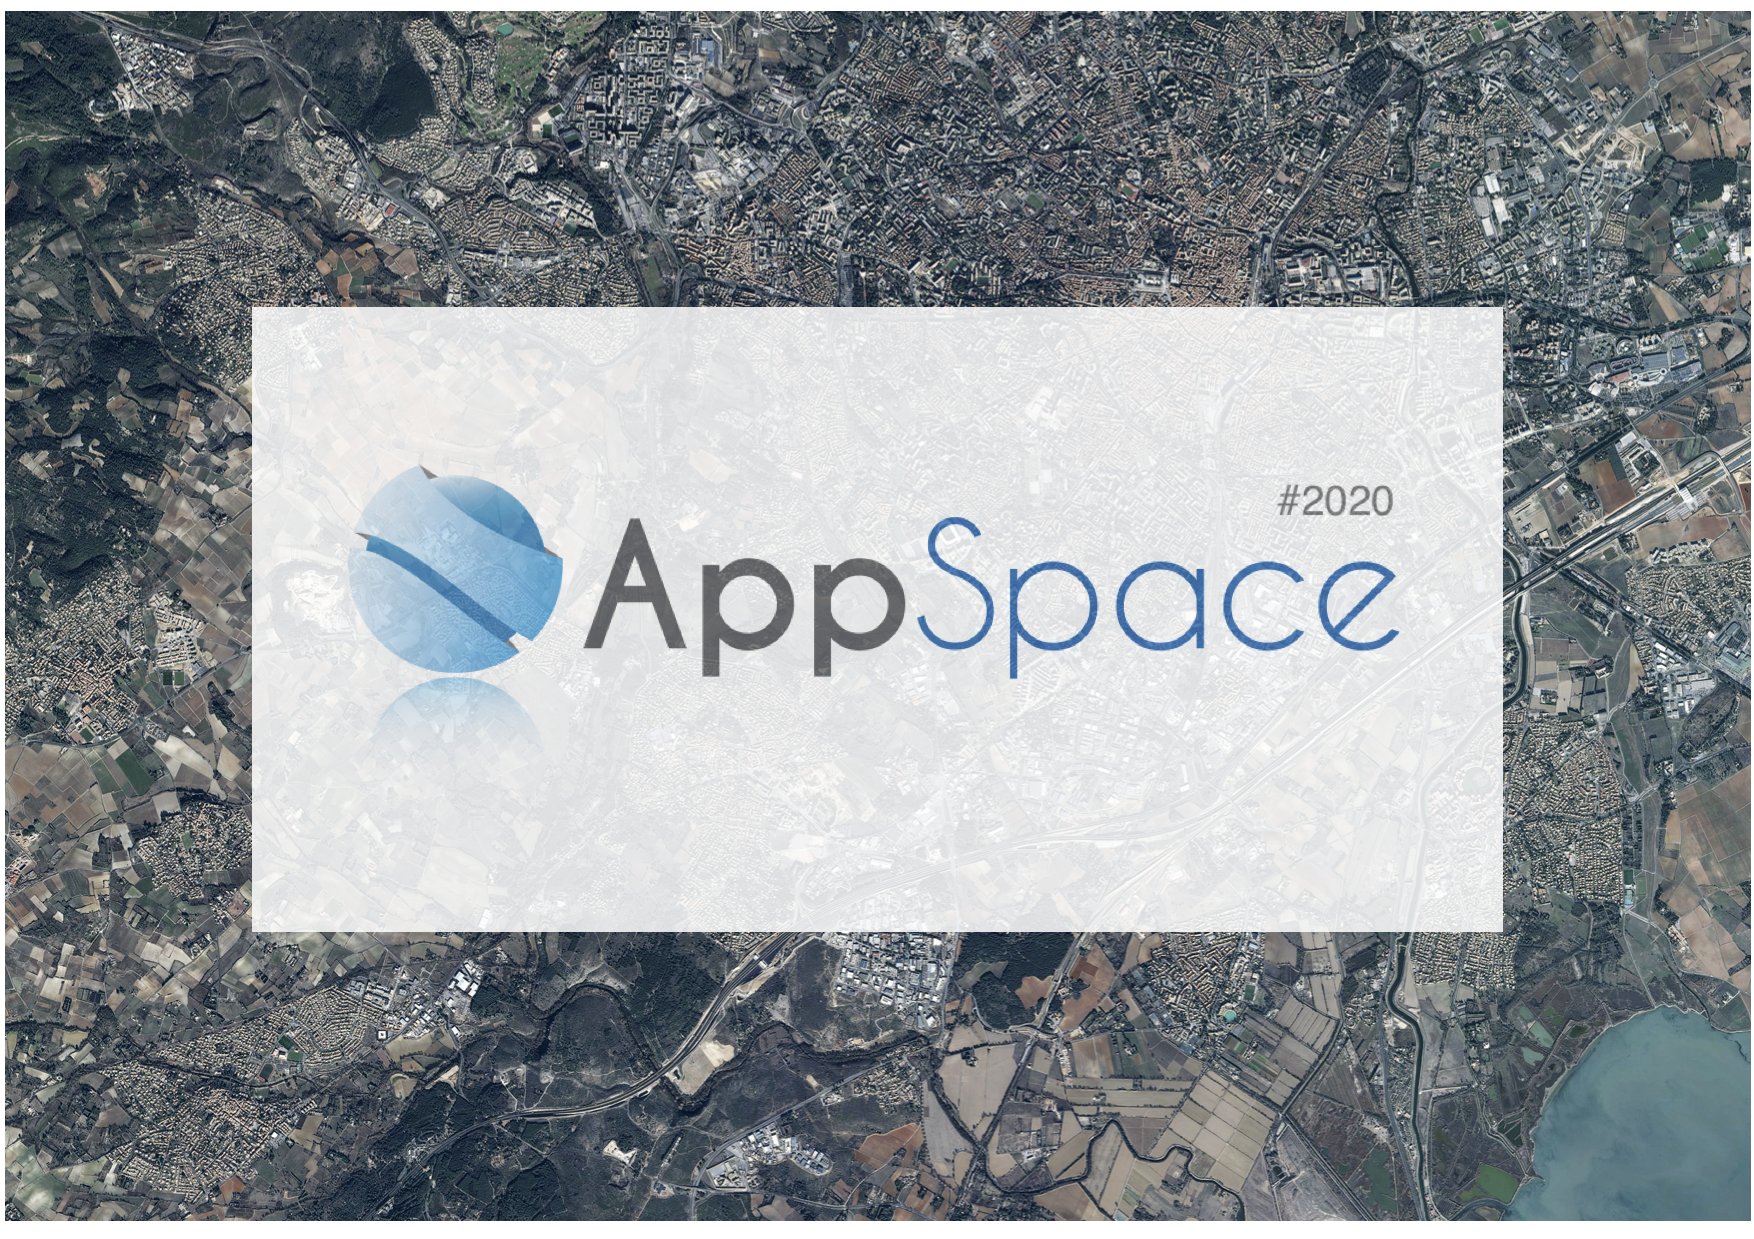 appspace2020